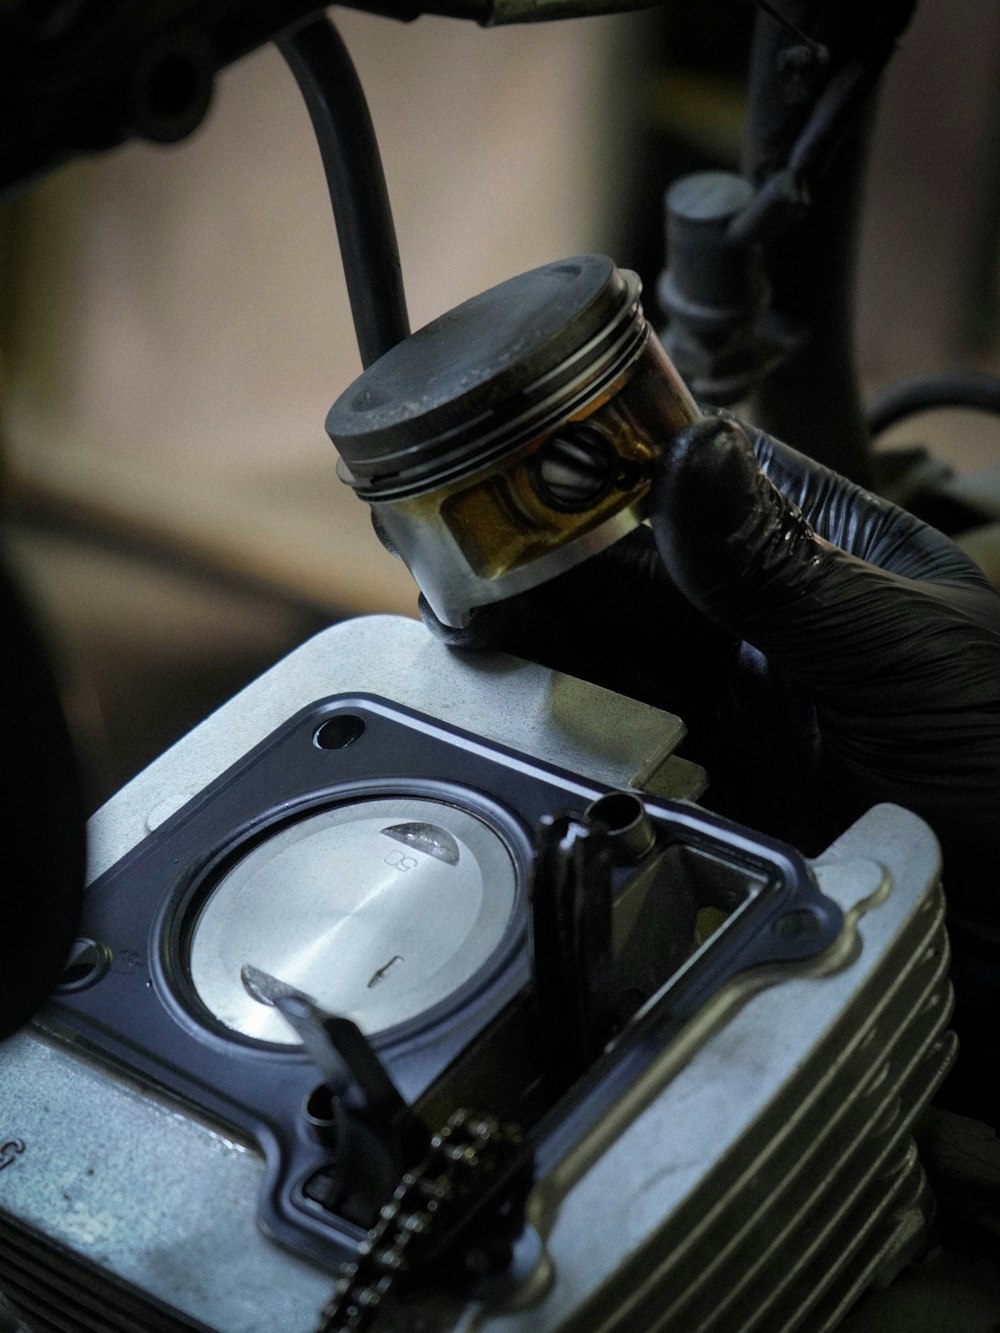 a close up of a motorcycle engine with a person wearing gloves